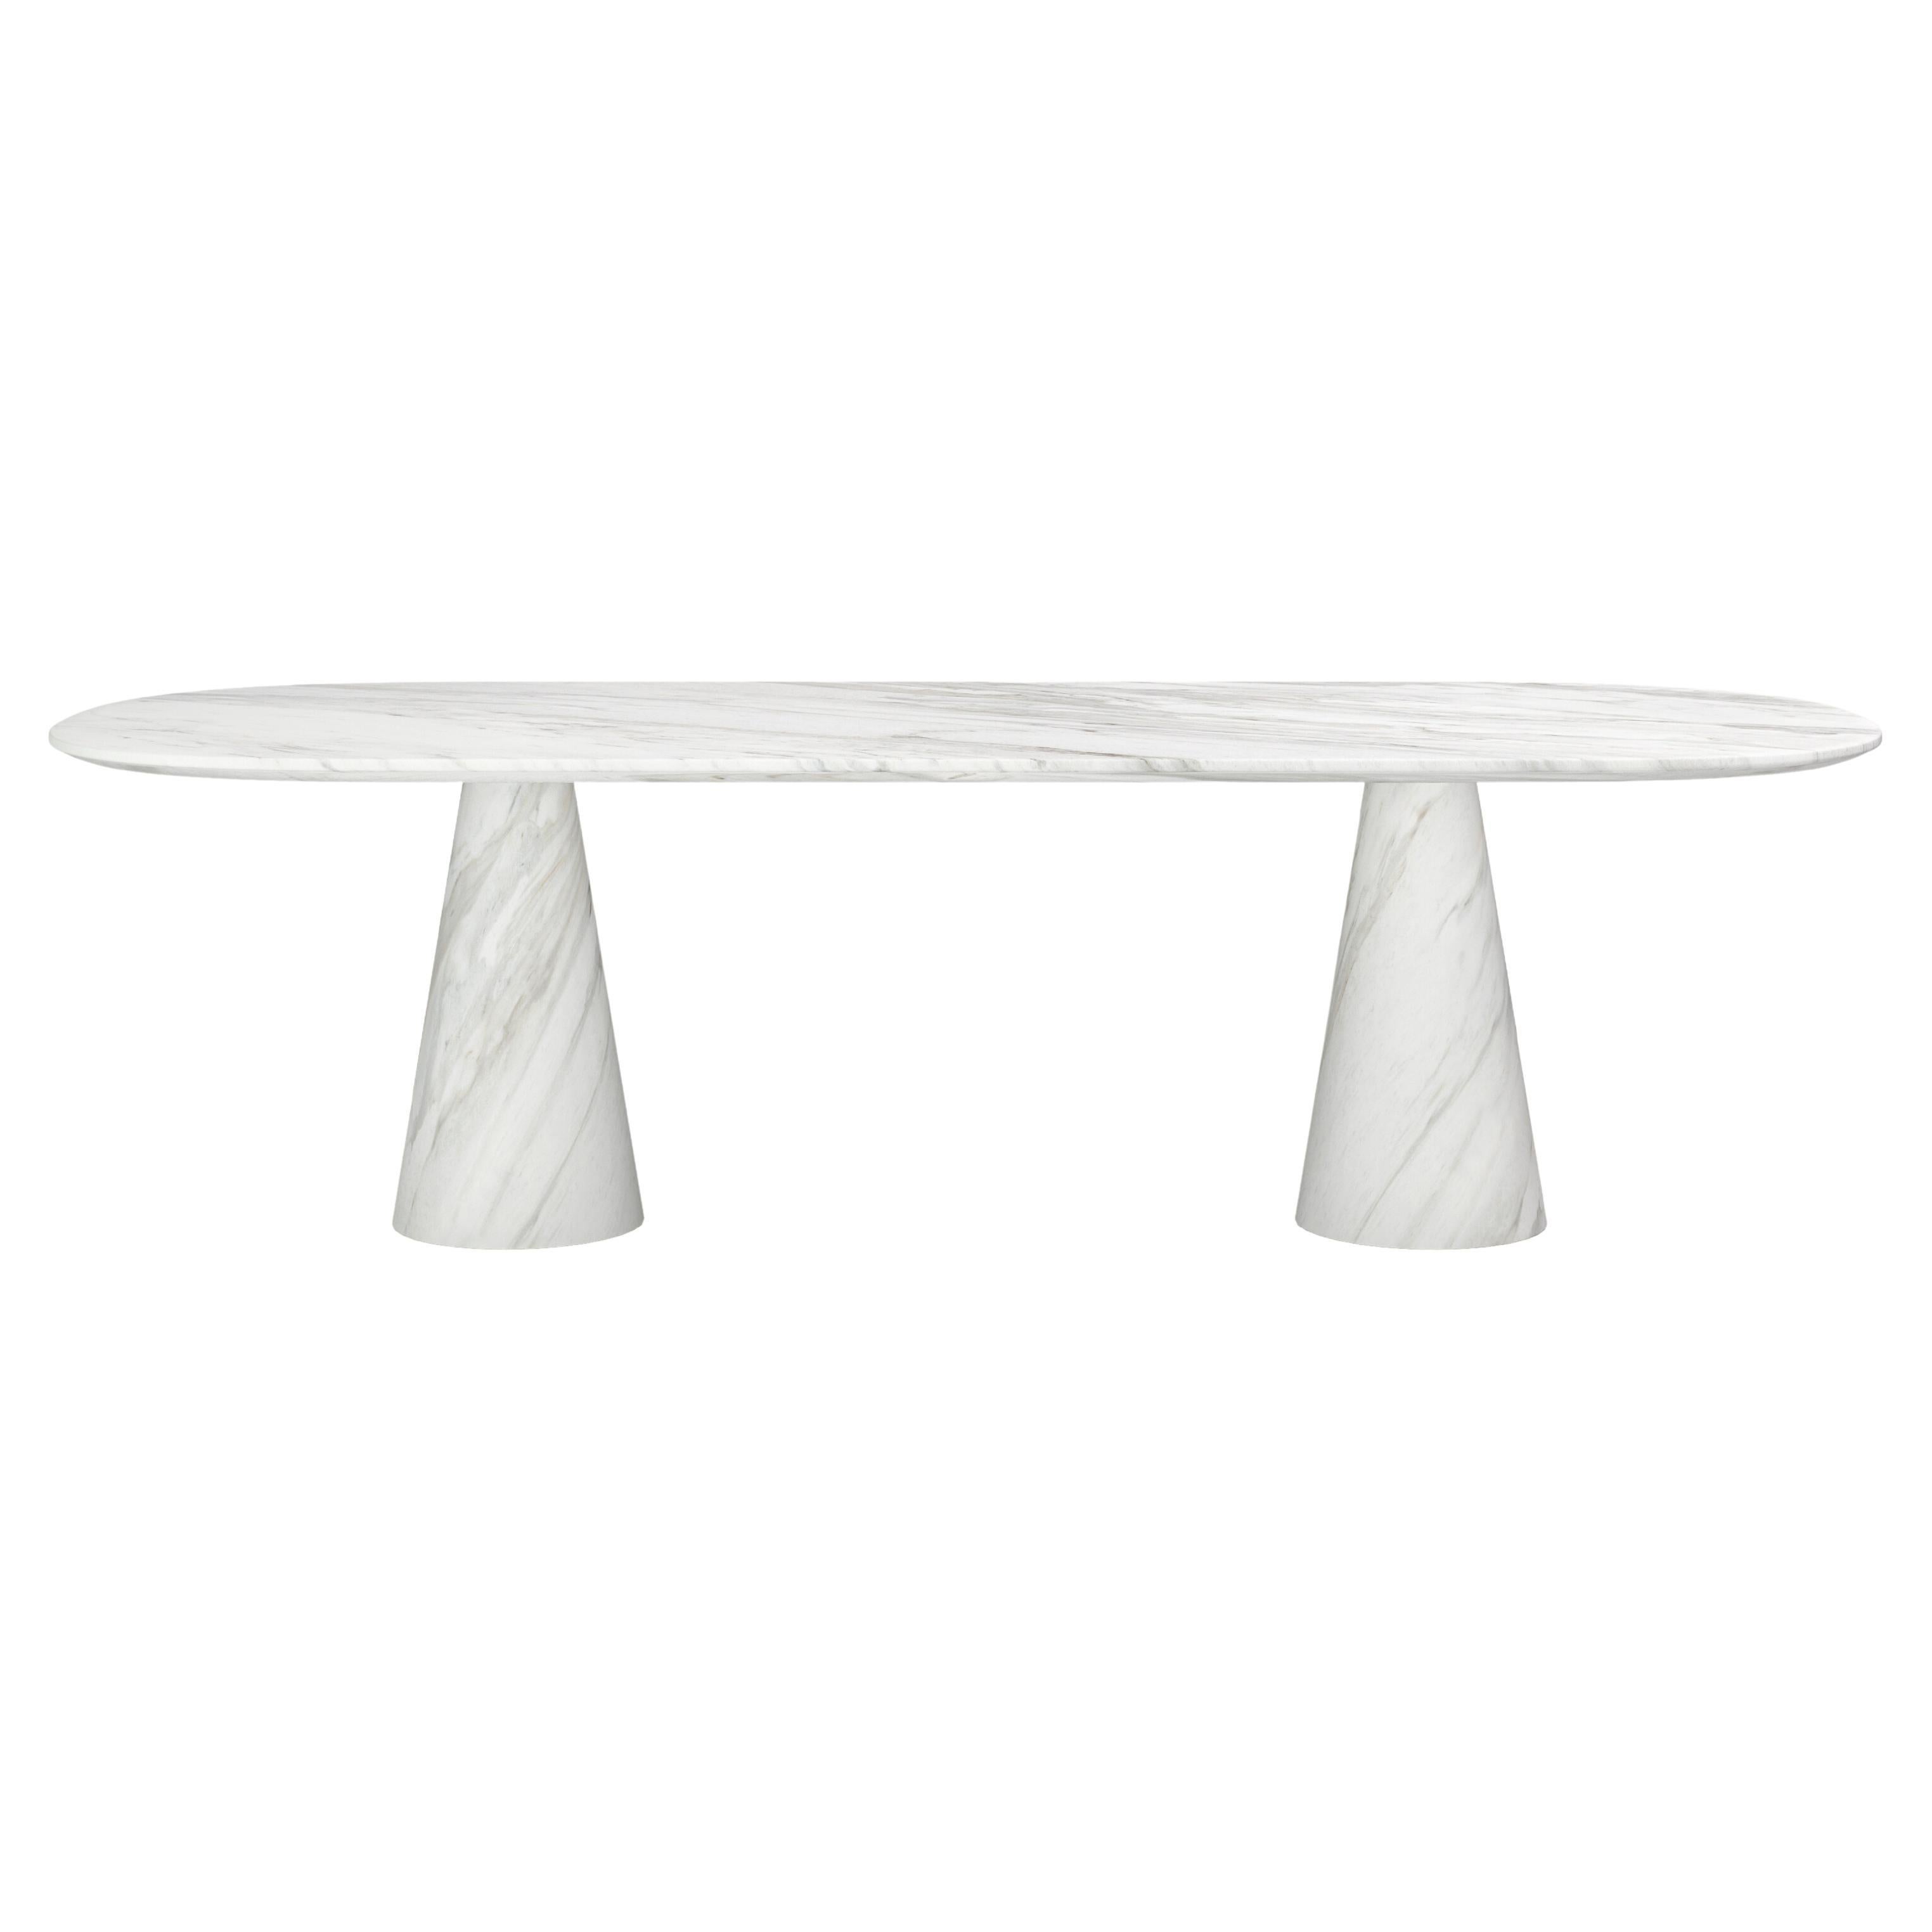 FORM(LA) Cono Oval Dining Table 108”L x 48”W x 30”H Volakas White Marble For Sale